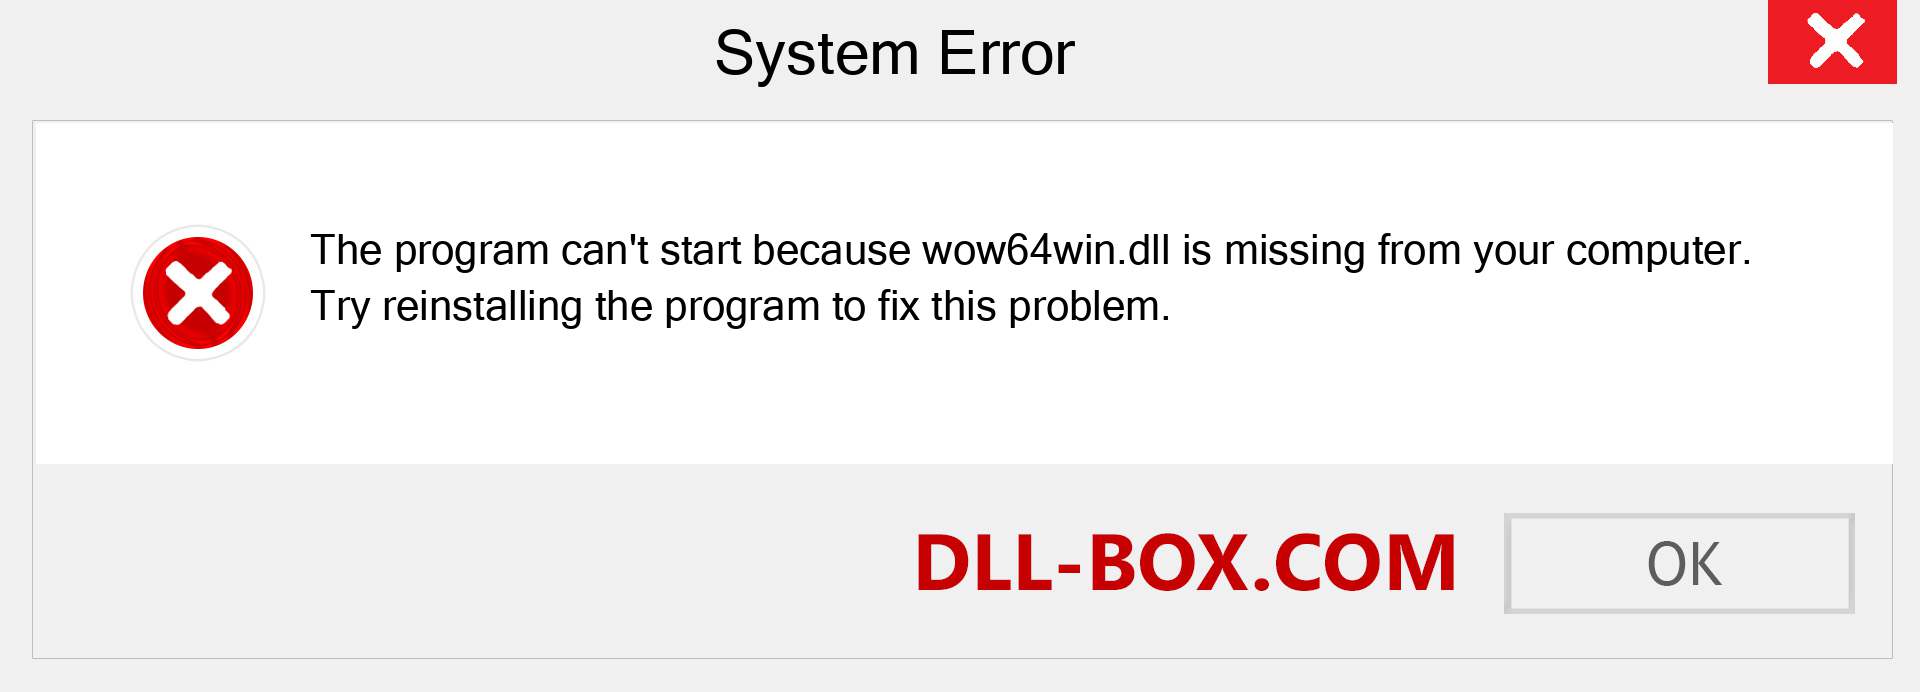  wow64win.dll file is missing?. Download for Windows 7, 8, 10 - Fix  wow64win dll Missing Error on Windows, photos, images